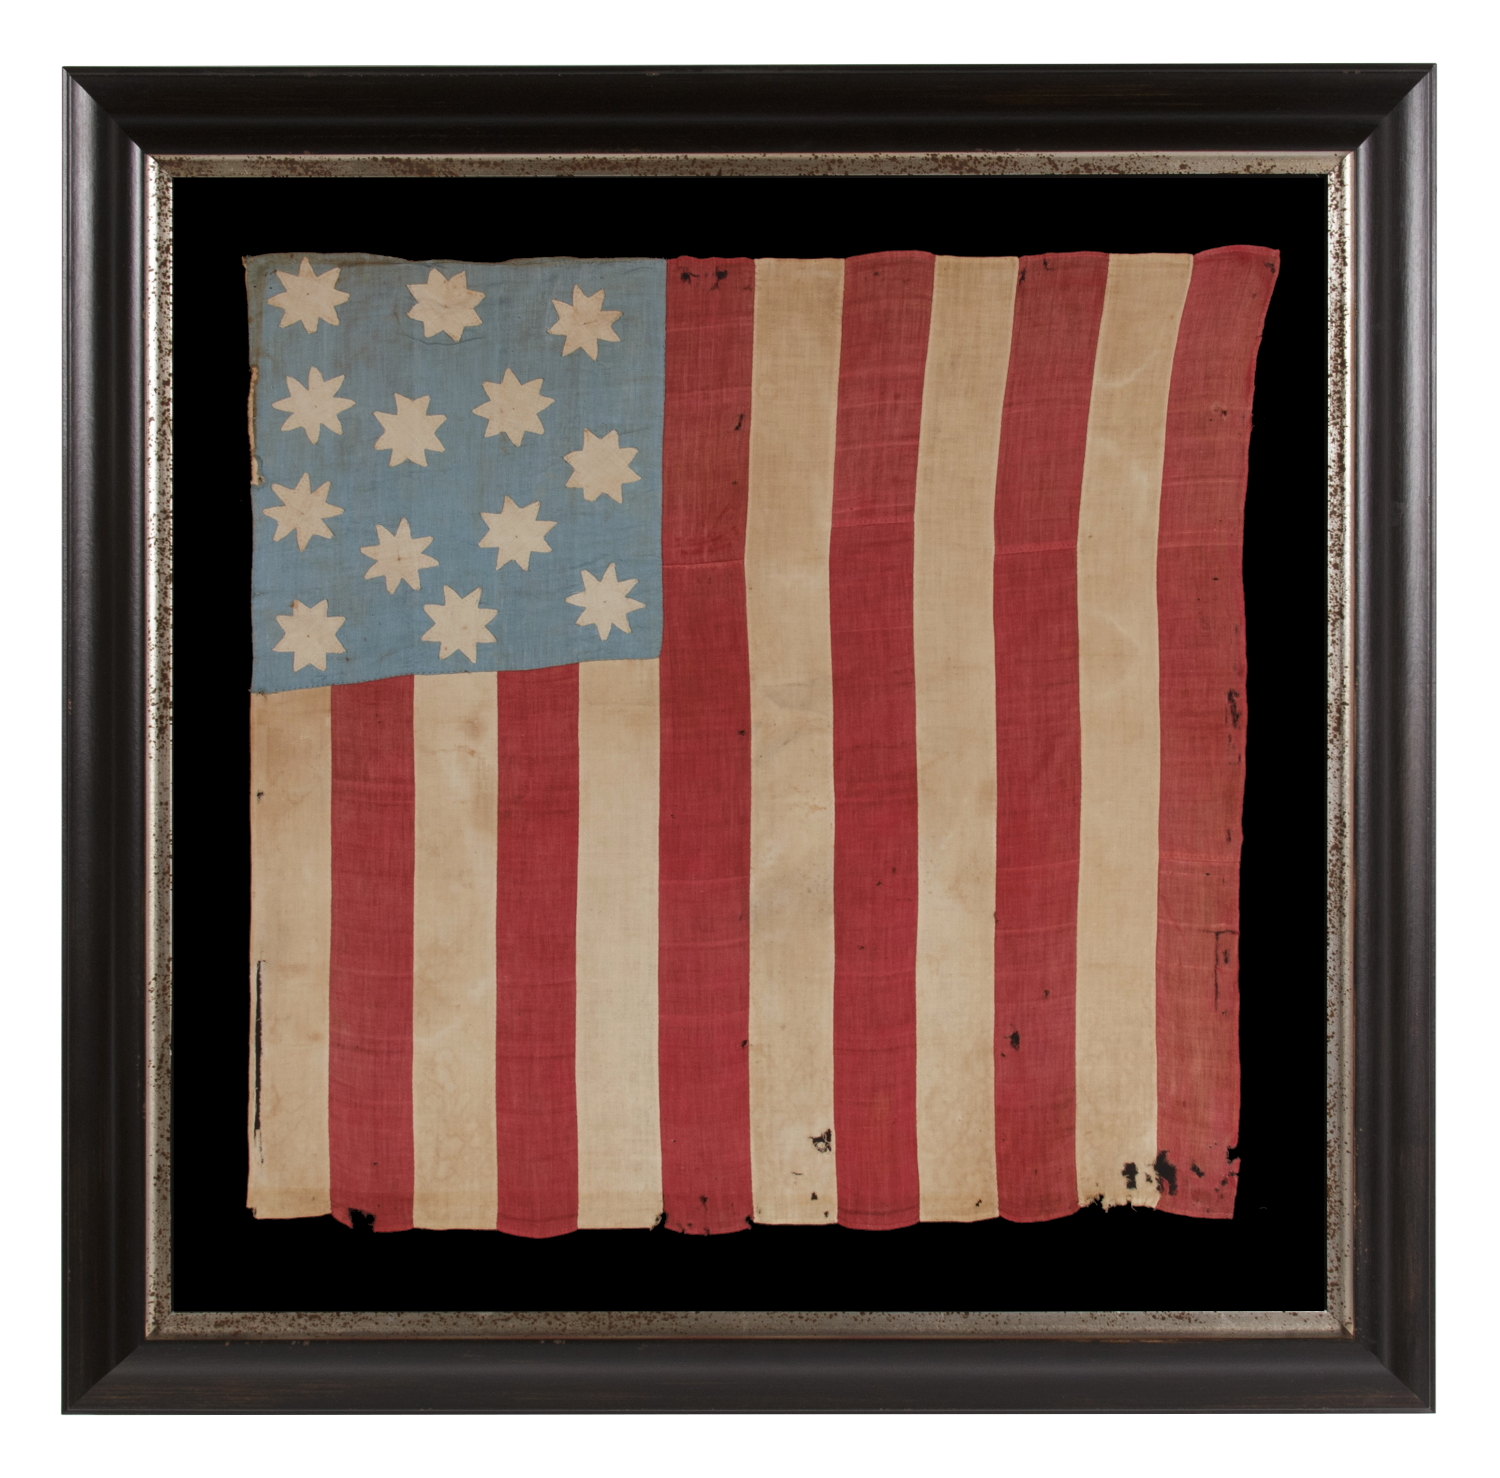 EXTRAORDINARY, HAND-SEWN, 13 STAR AMERICAN NATIONAL FLAG WITH 8-POINTED STARS ON A GLAZED COTTON, CORNFLOWER BLUE CANTON, 12 STRIPES, AND ITS CANTON RESTING ON THE WAR STRIPE, FOUND IN UPSTATE, NEW YORK, PRE-CIVIL WAR, CA 1830-1850